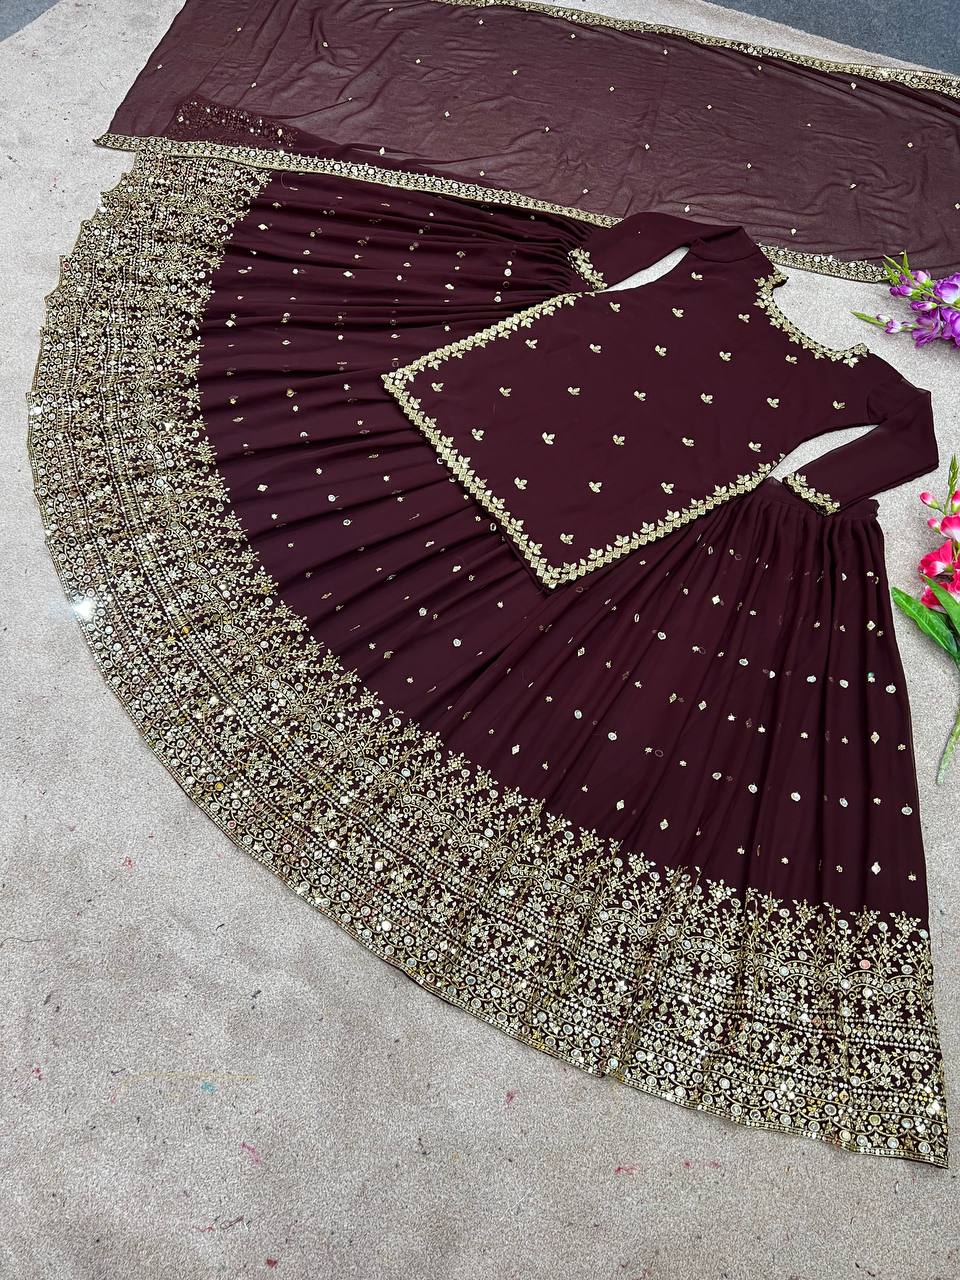 Marvelous Embroidery Work Maroon Color Lehenga With Top